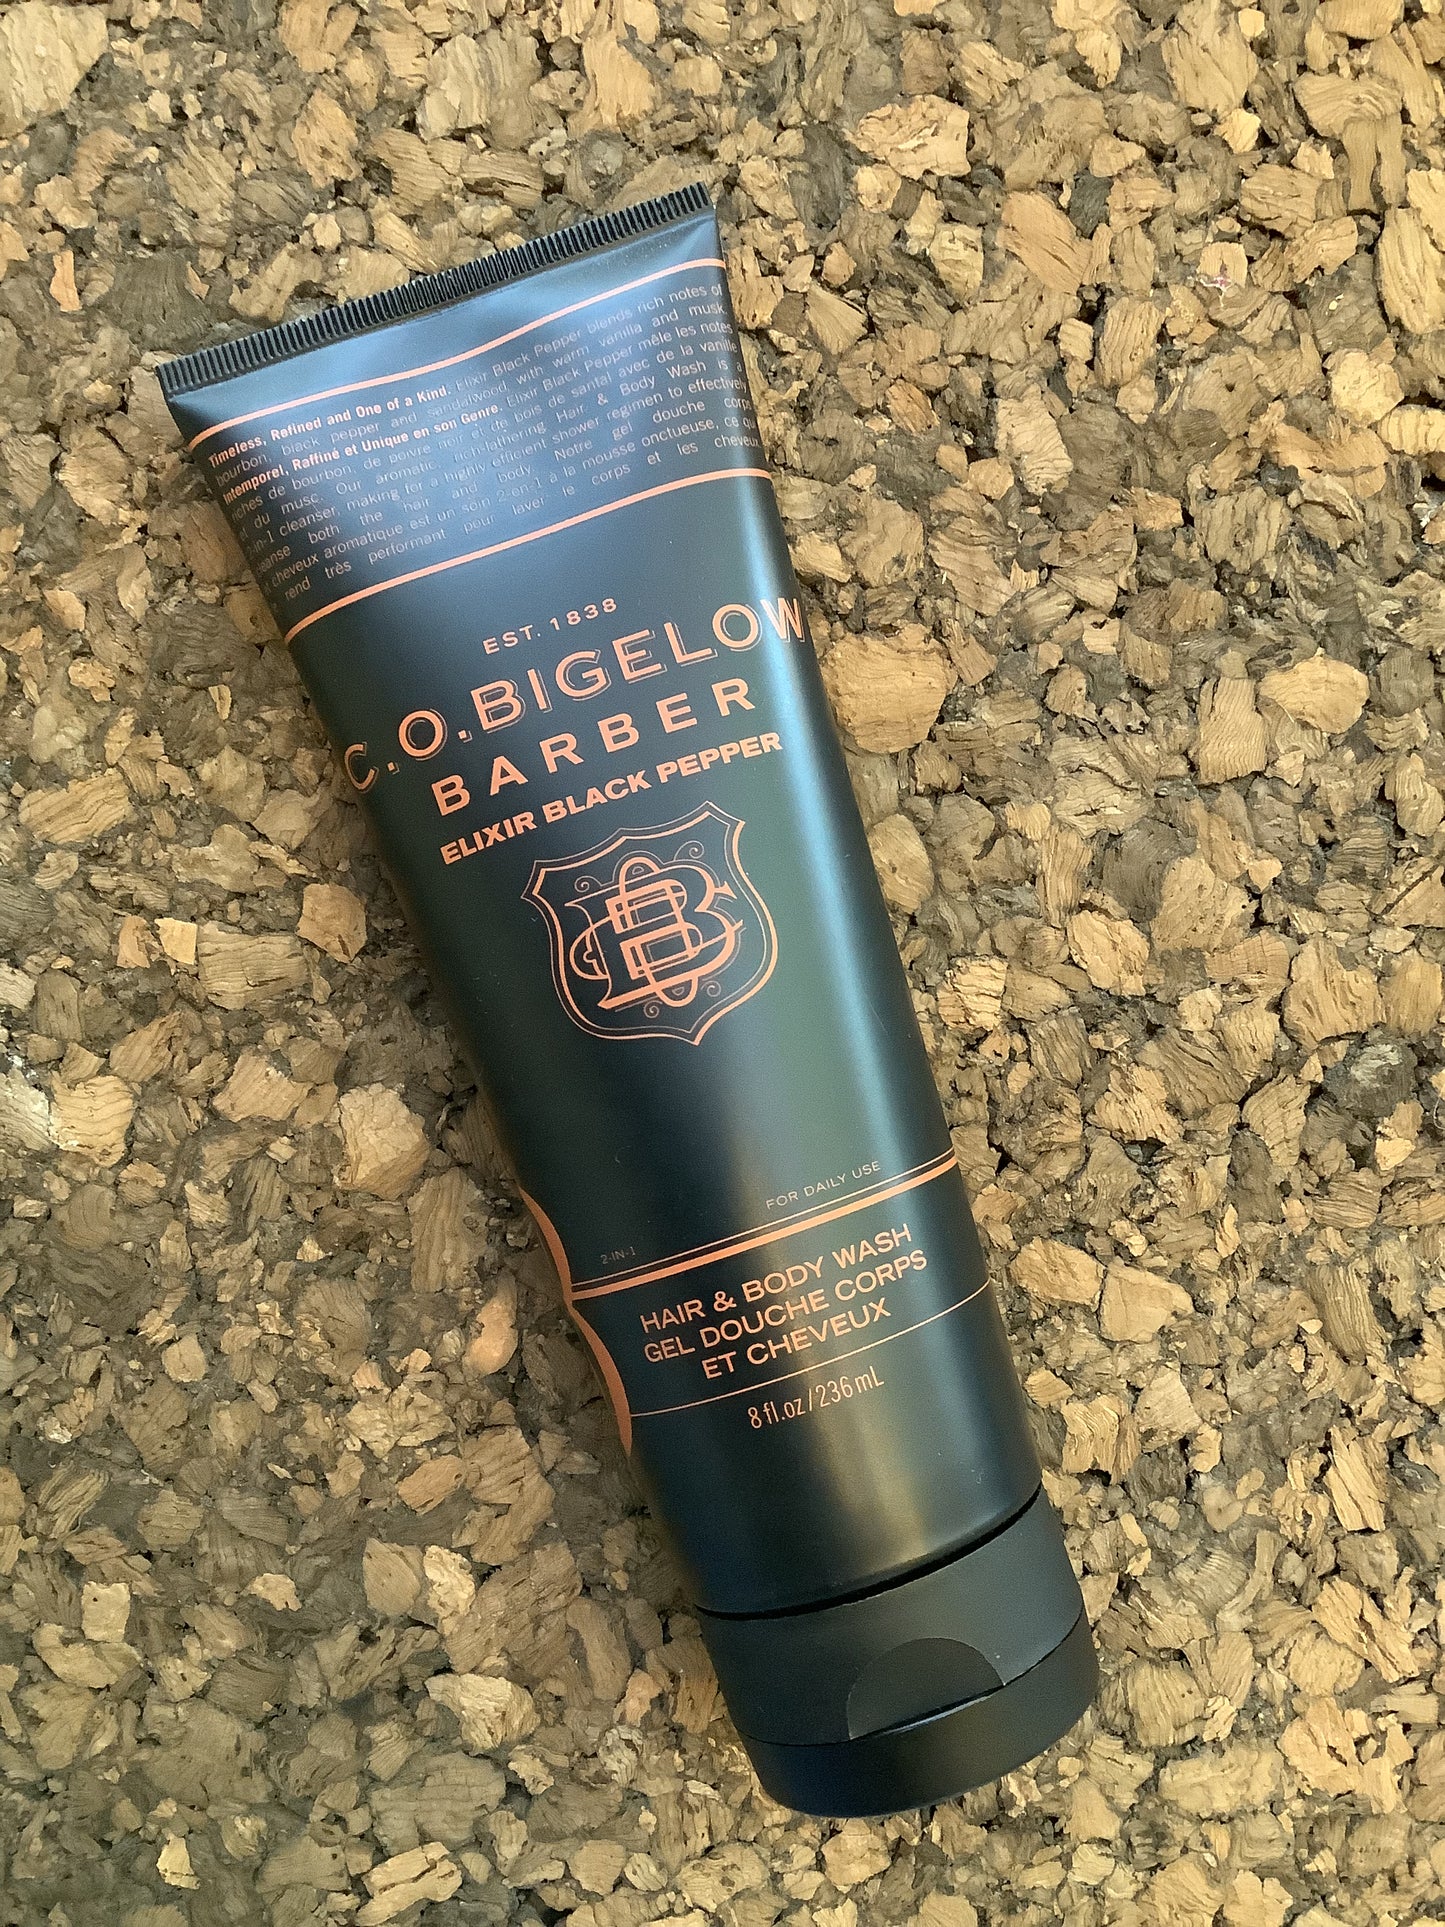 Container of C.O. Bigelow Barber hair and body wash black pepper 